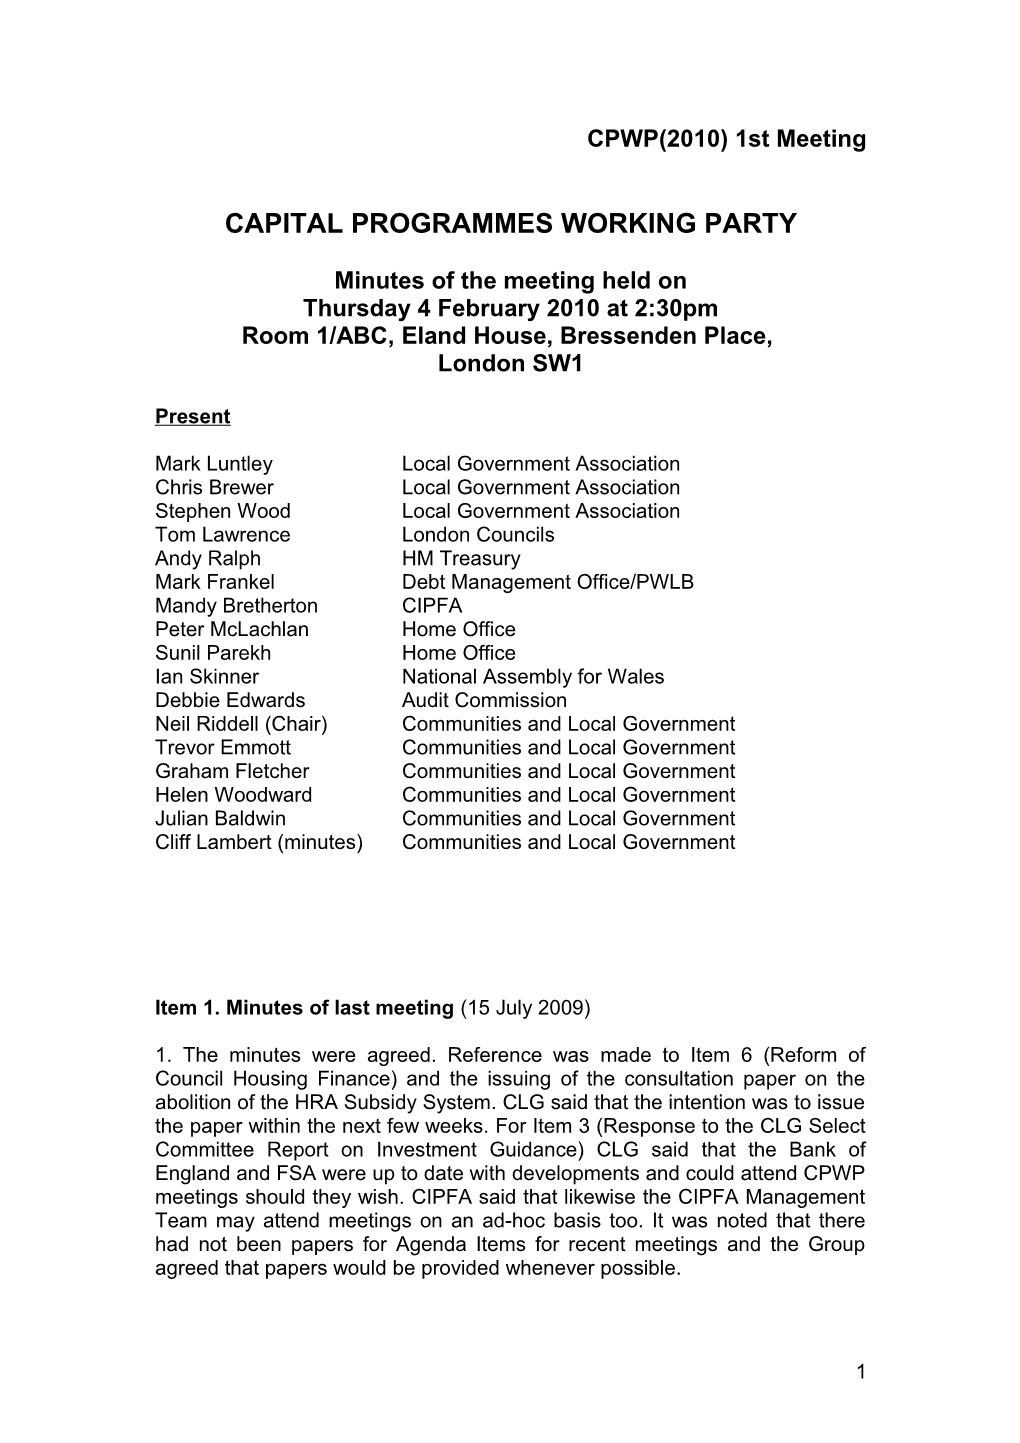 CAPITAL PROGRAMME WORKING PARTY - Minutes